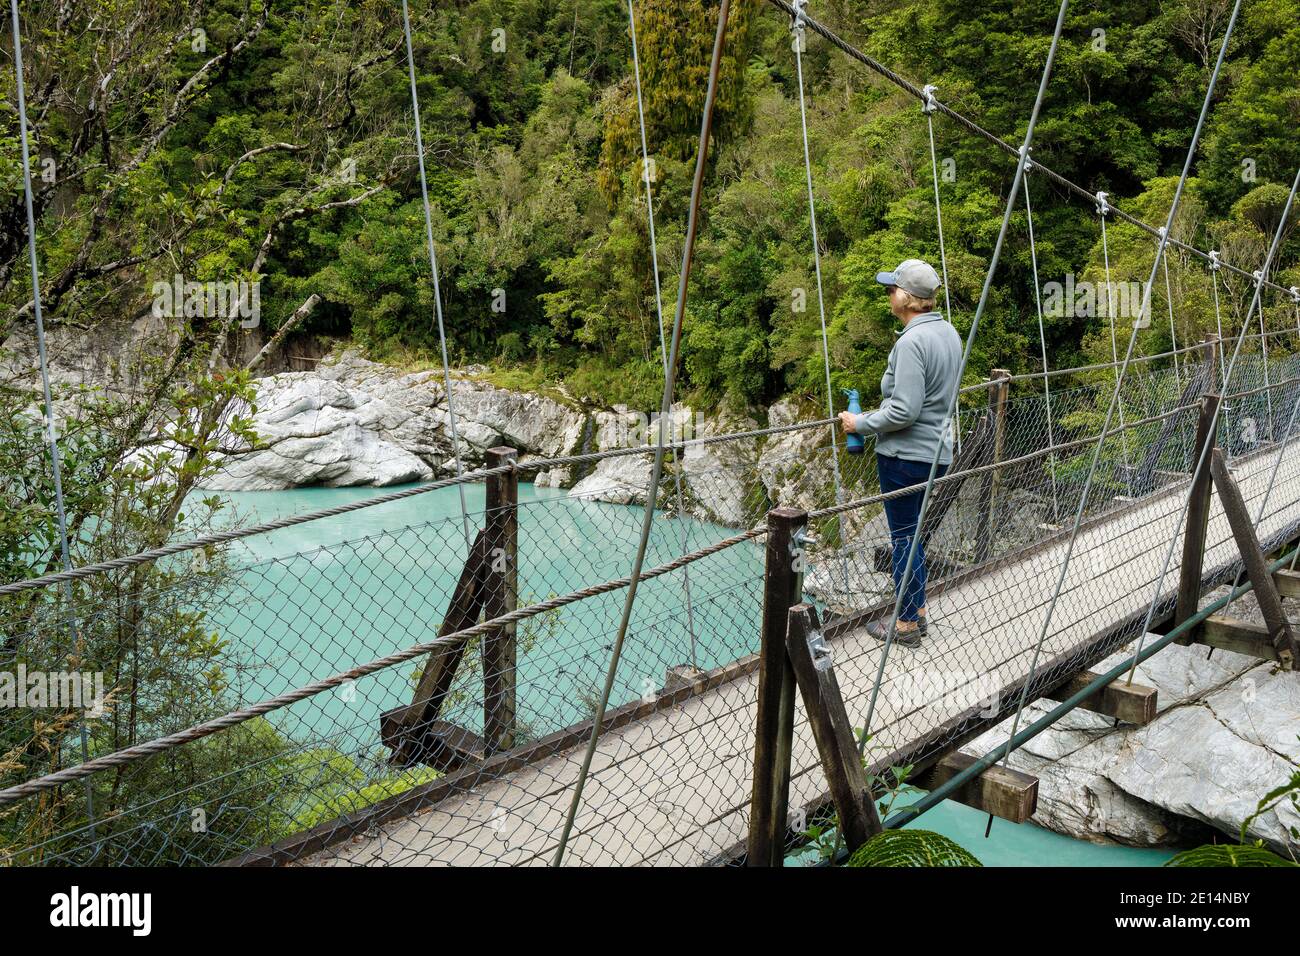 Hokitika Gorge, part of the scenic reserve, and the Hokitika River flowing through the granite rock formations. South Island West Coast, New Zealand. Stock Photo